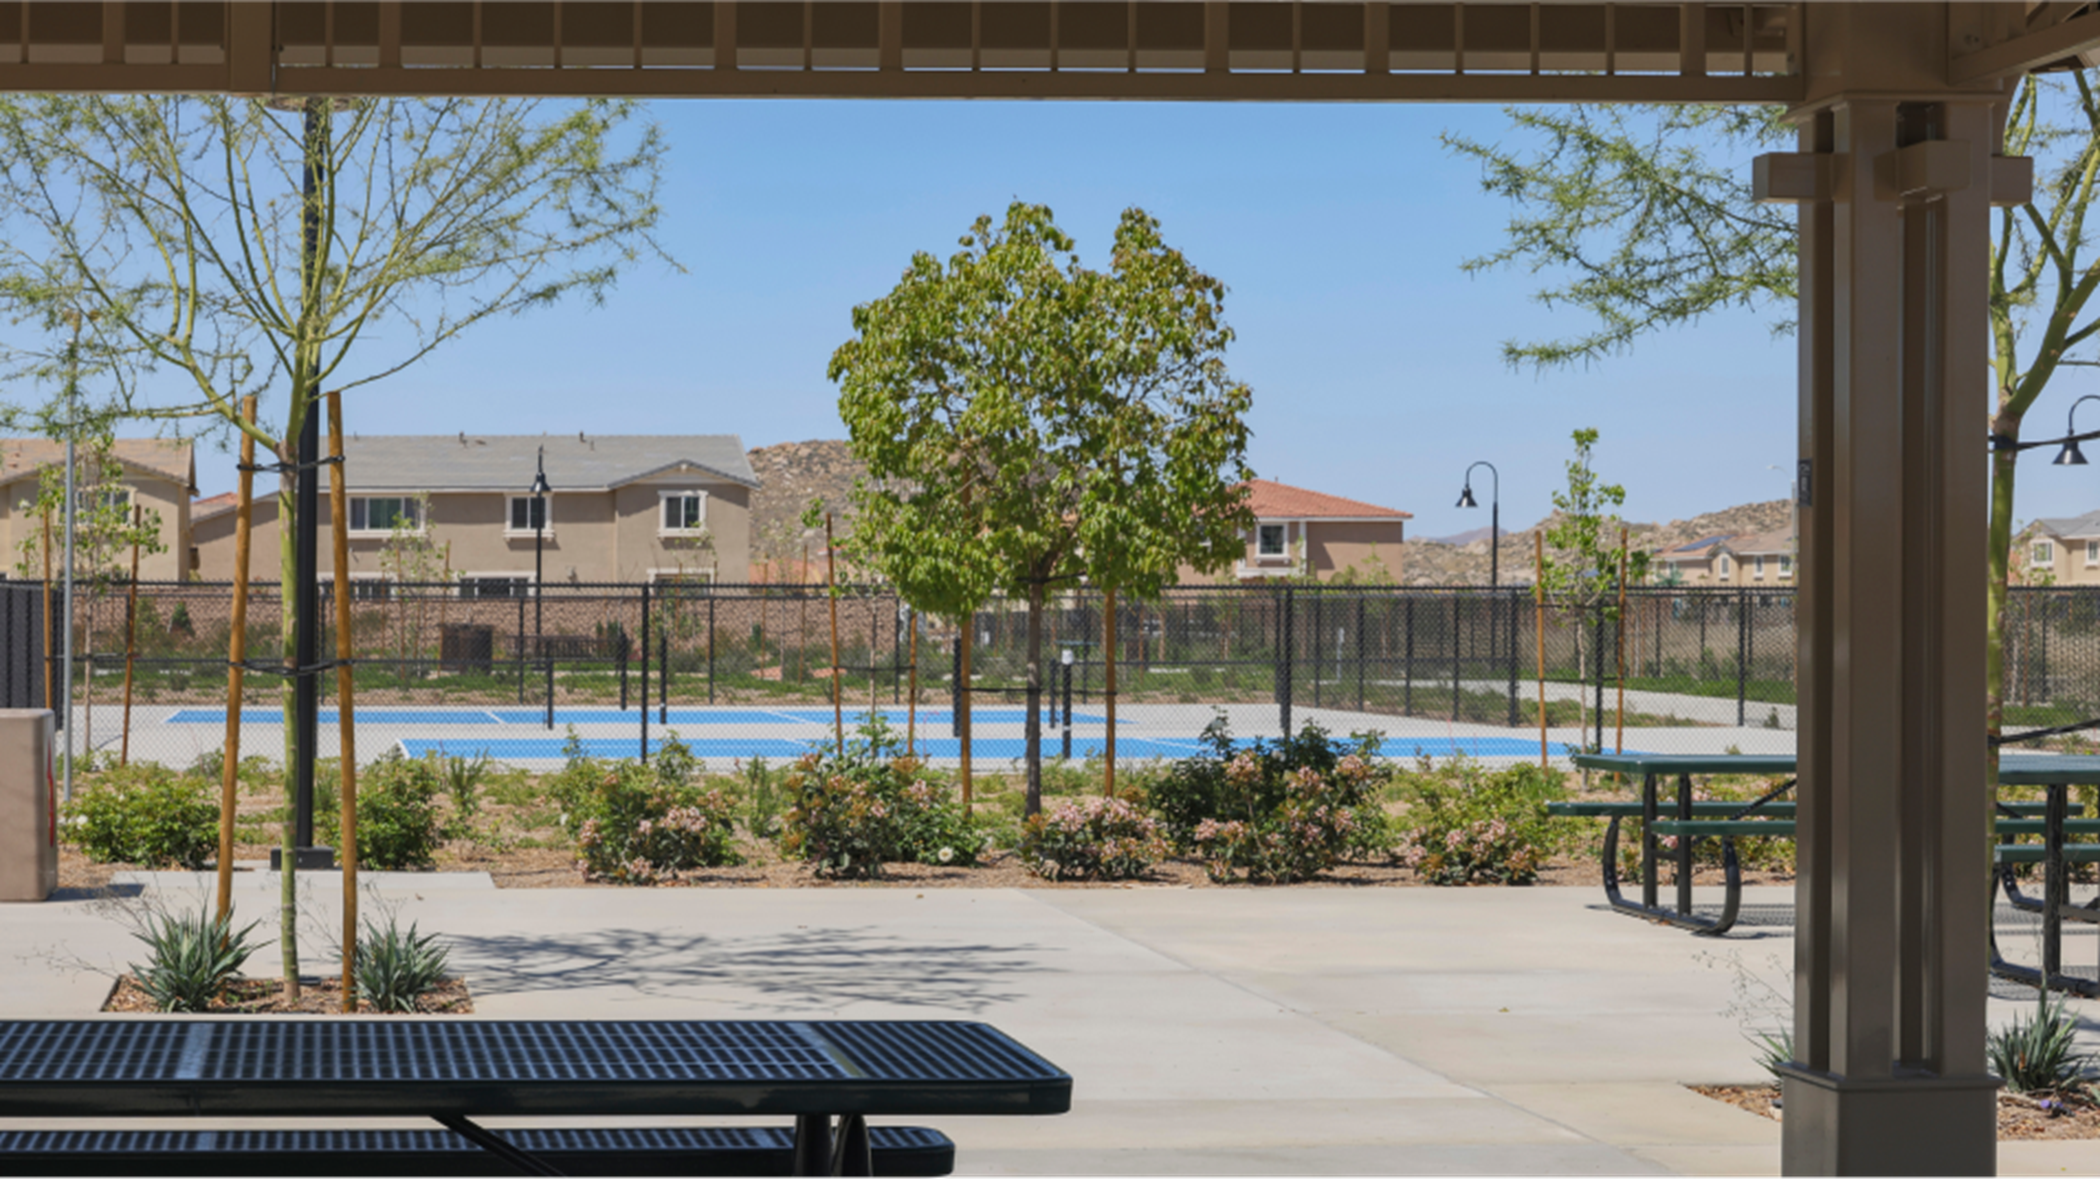 Shaded benches overlooking pickleball courts